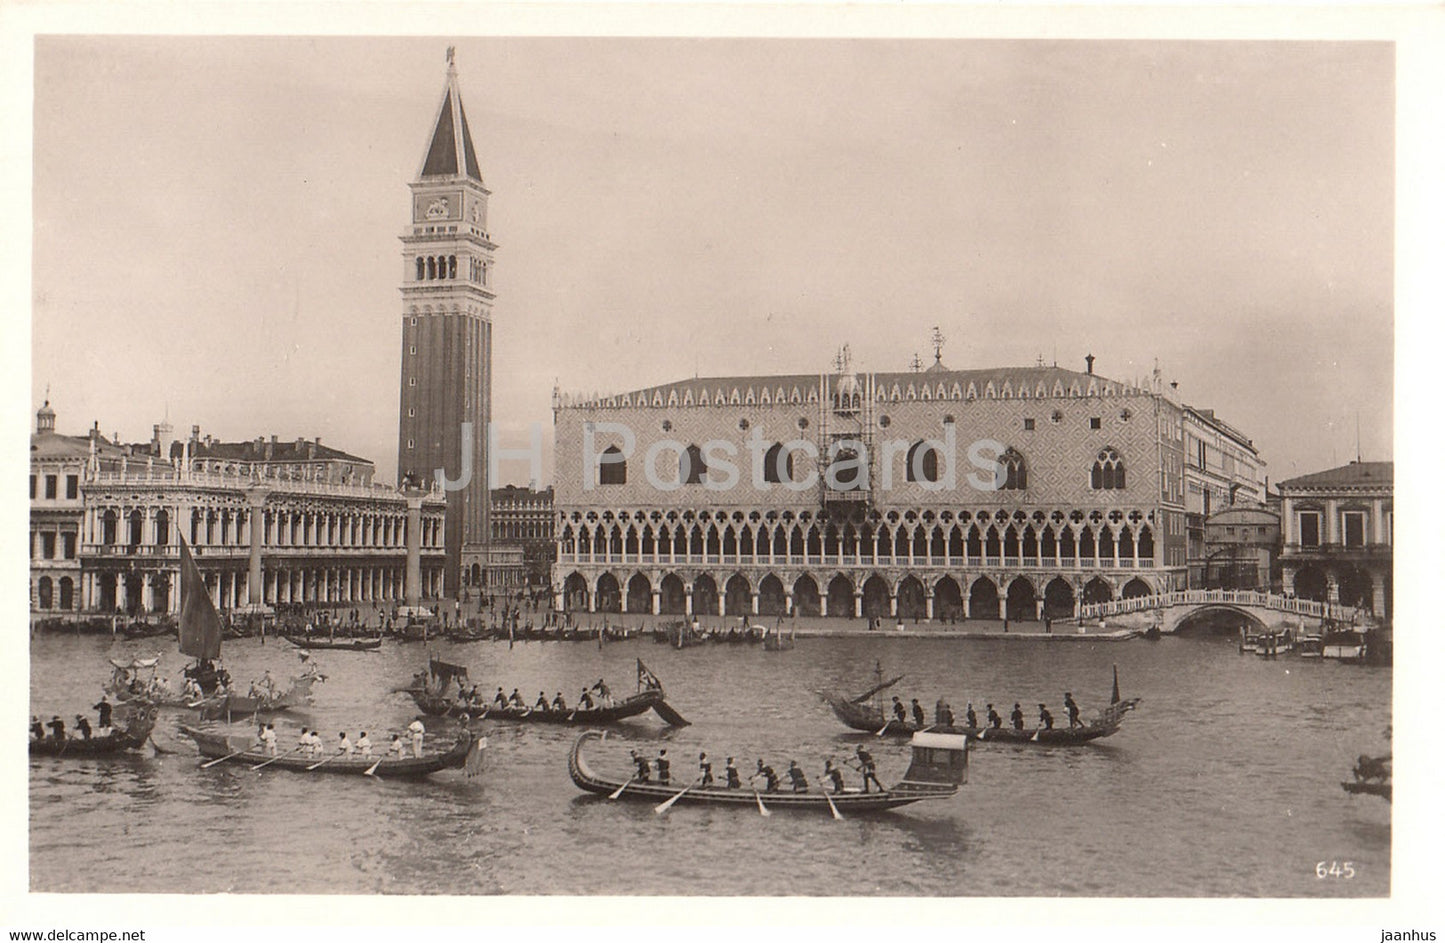 Venezia - Vendig - Venice - Palace of the Doges on the Great Channel - 645 - old postcard - Italy - unused - JH Postcards